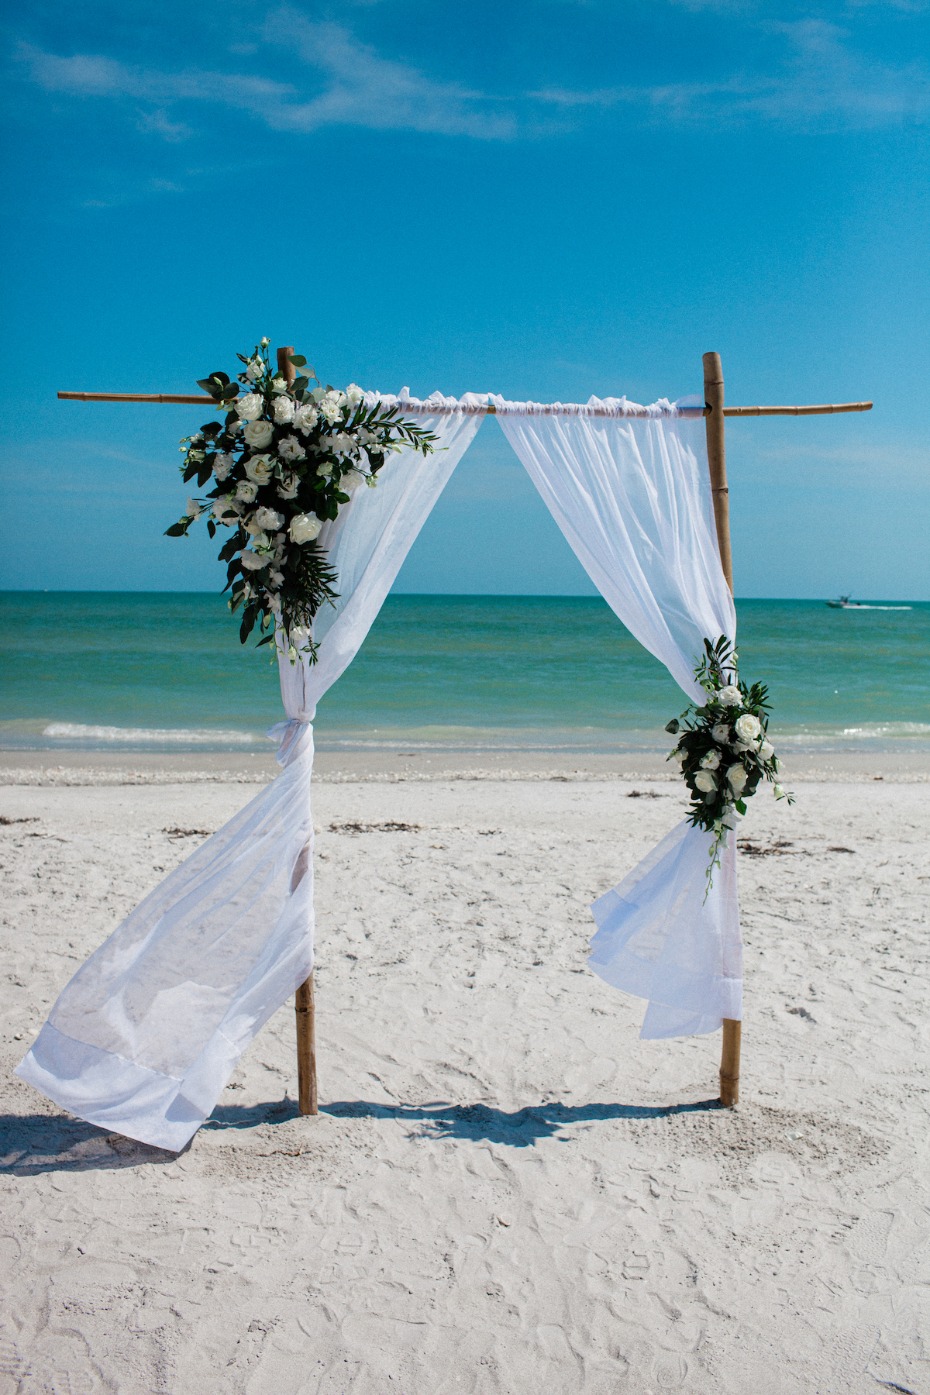 Tousled Hair, Don't Care: The Beaches of Fort Myers and Sanibel Will Do It for You When You Say 'I Do'